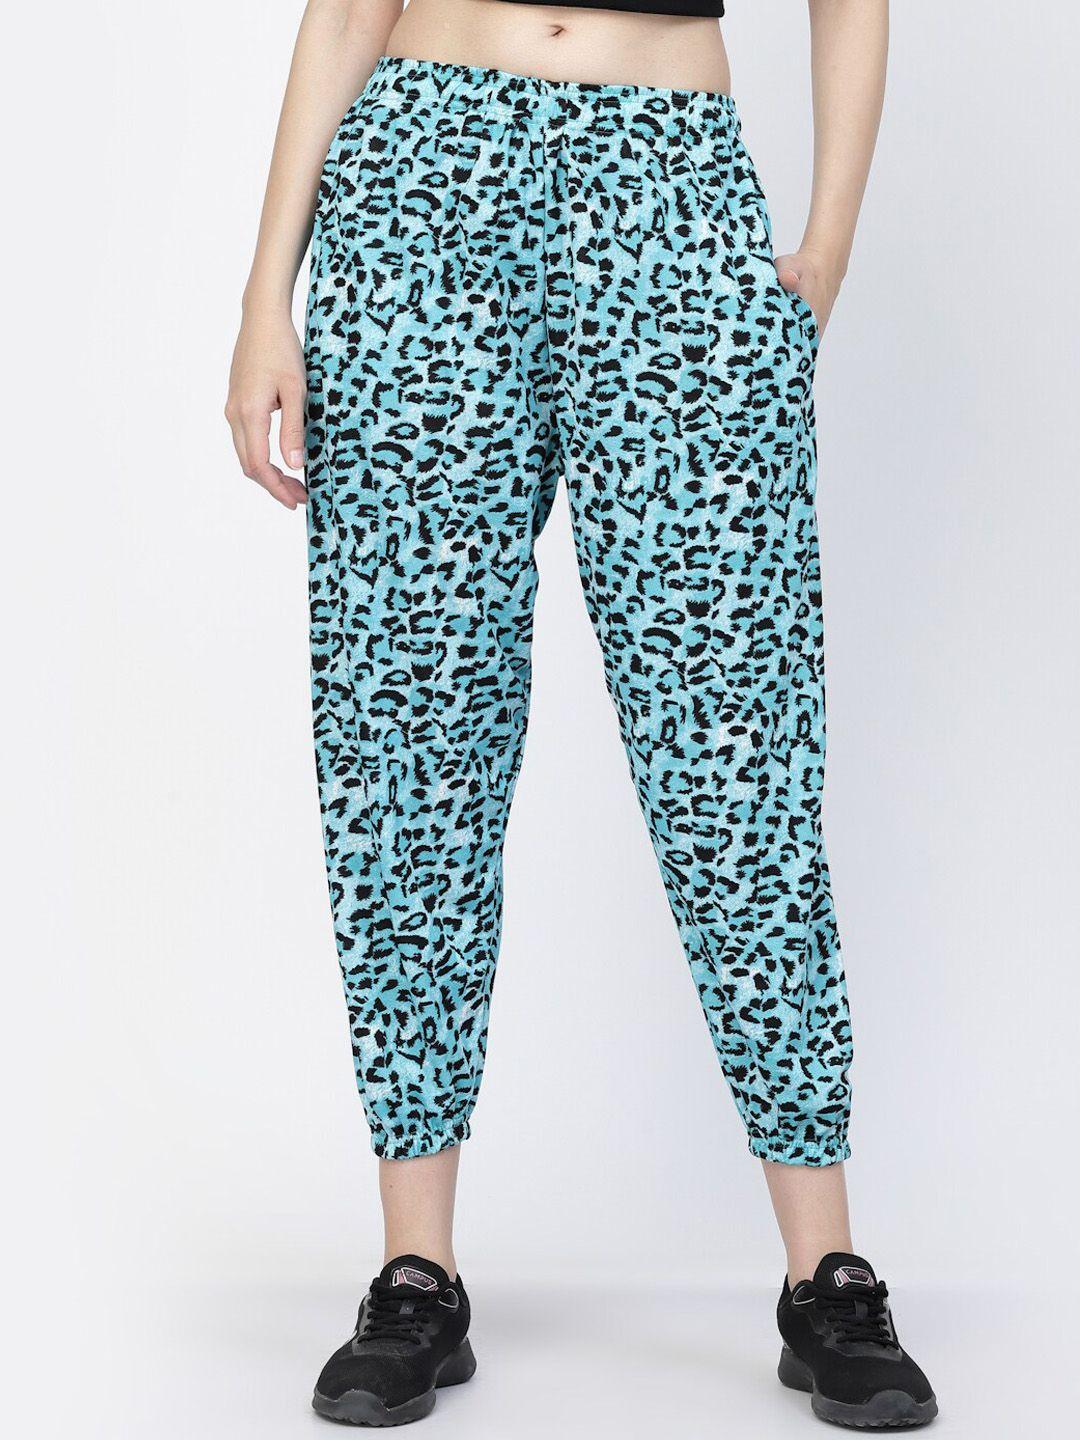 uzarus-women-animal-printed-relaxed-fit-joggers